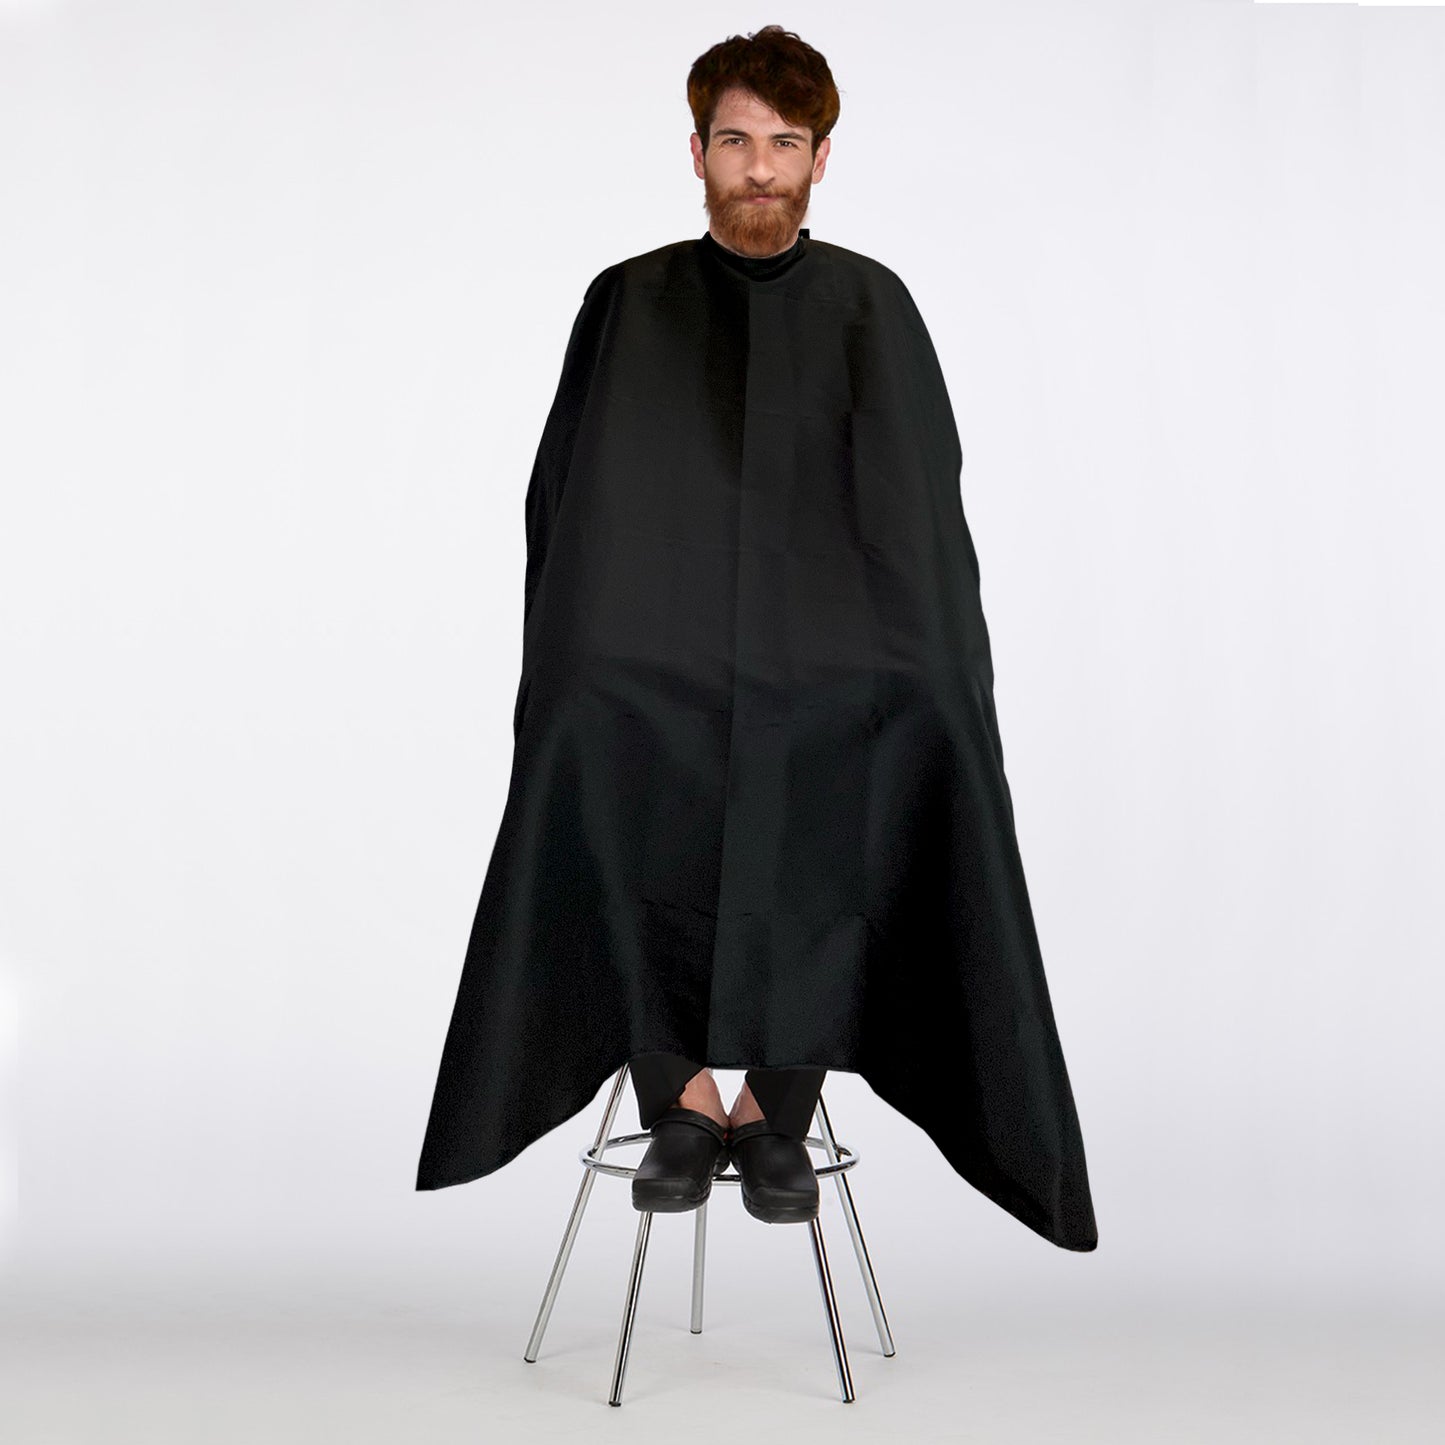 Allegro Combs All Purpose Salon Cape Barber Cape Styling Cape Haircut Cape Unisex  Kids Cutting Coloring Hair Adjustable Cape for Hair Treatment Waterproof One-Size-fits-All Black 46 x 60 In.